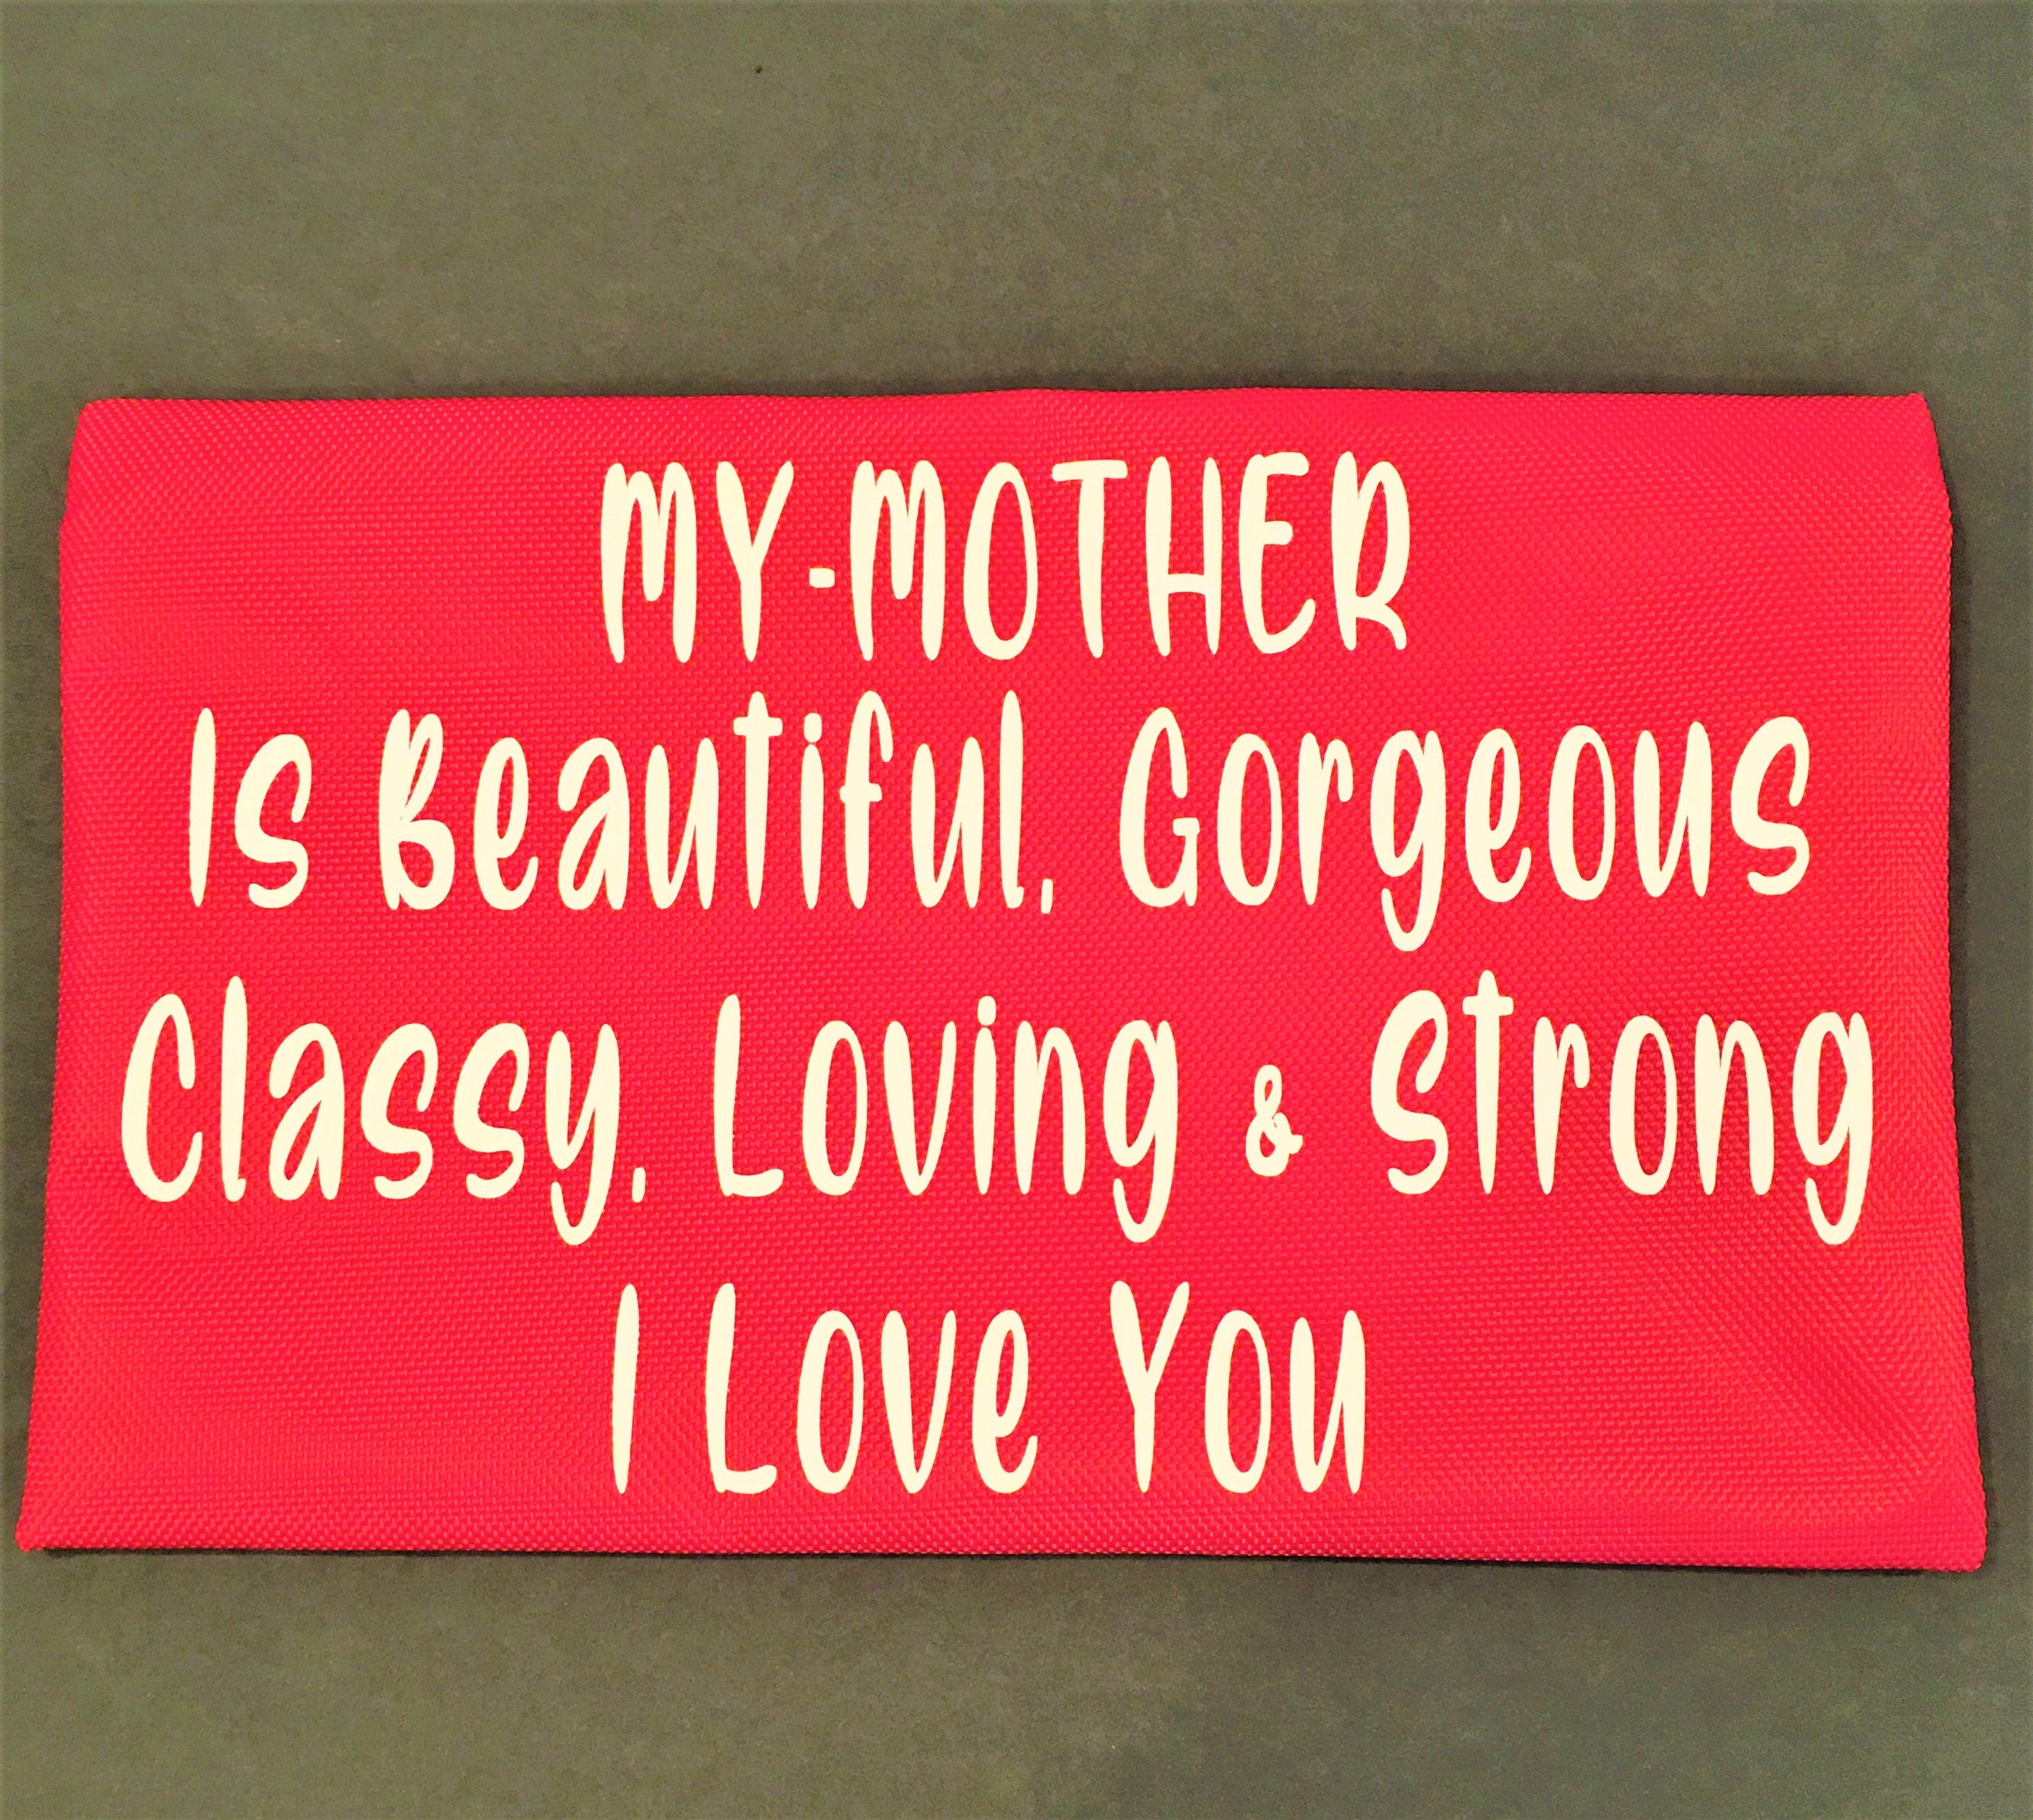 My Mother Is Beautiful Make-up bag 12x 7.5"